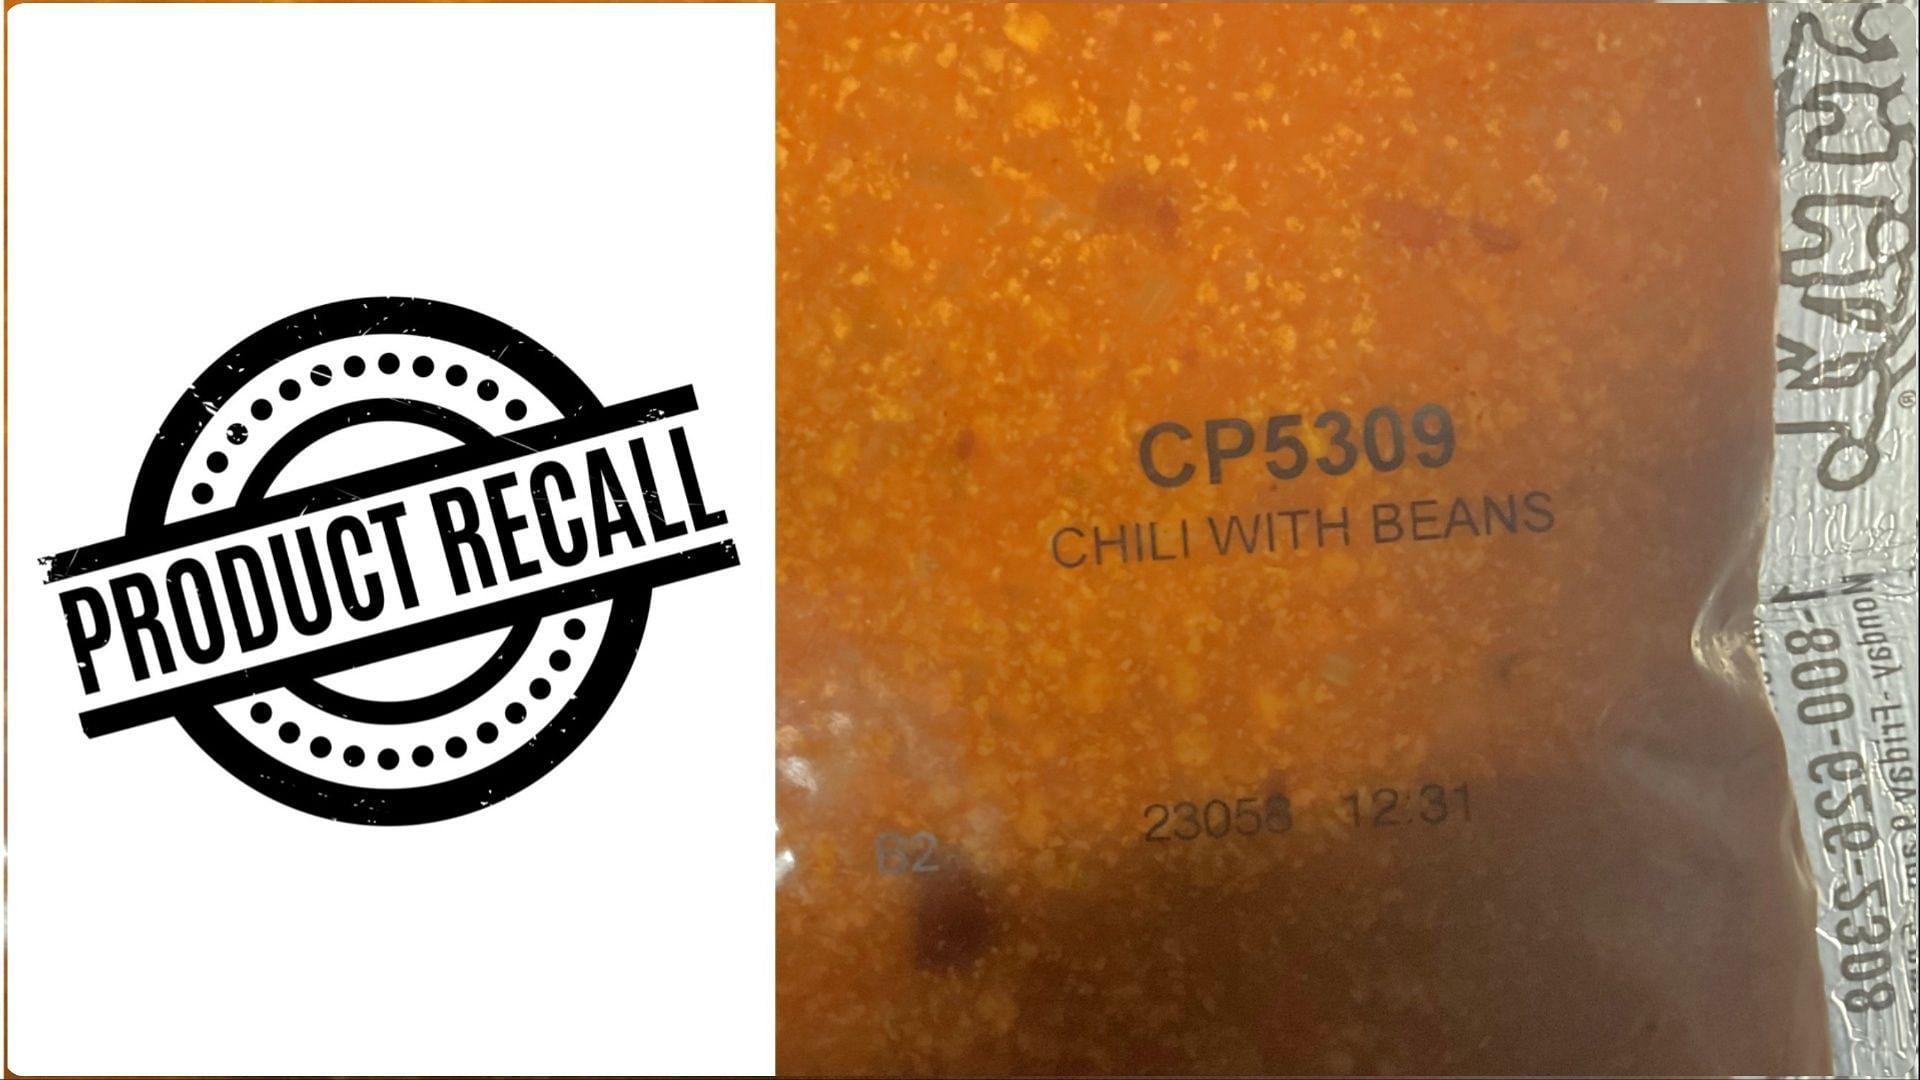 J.T.M. Provisions Company recalls Frozen Beef Chilli products over extraneous material contamination concerns (Image via FSIS)